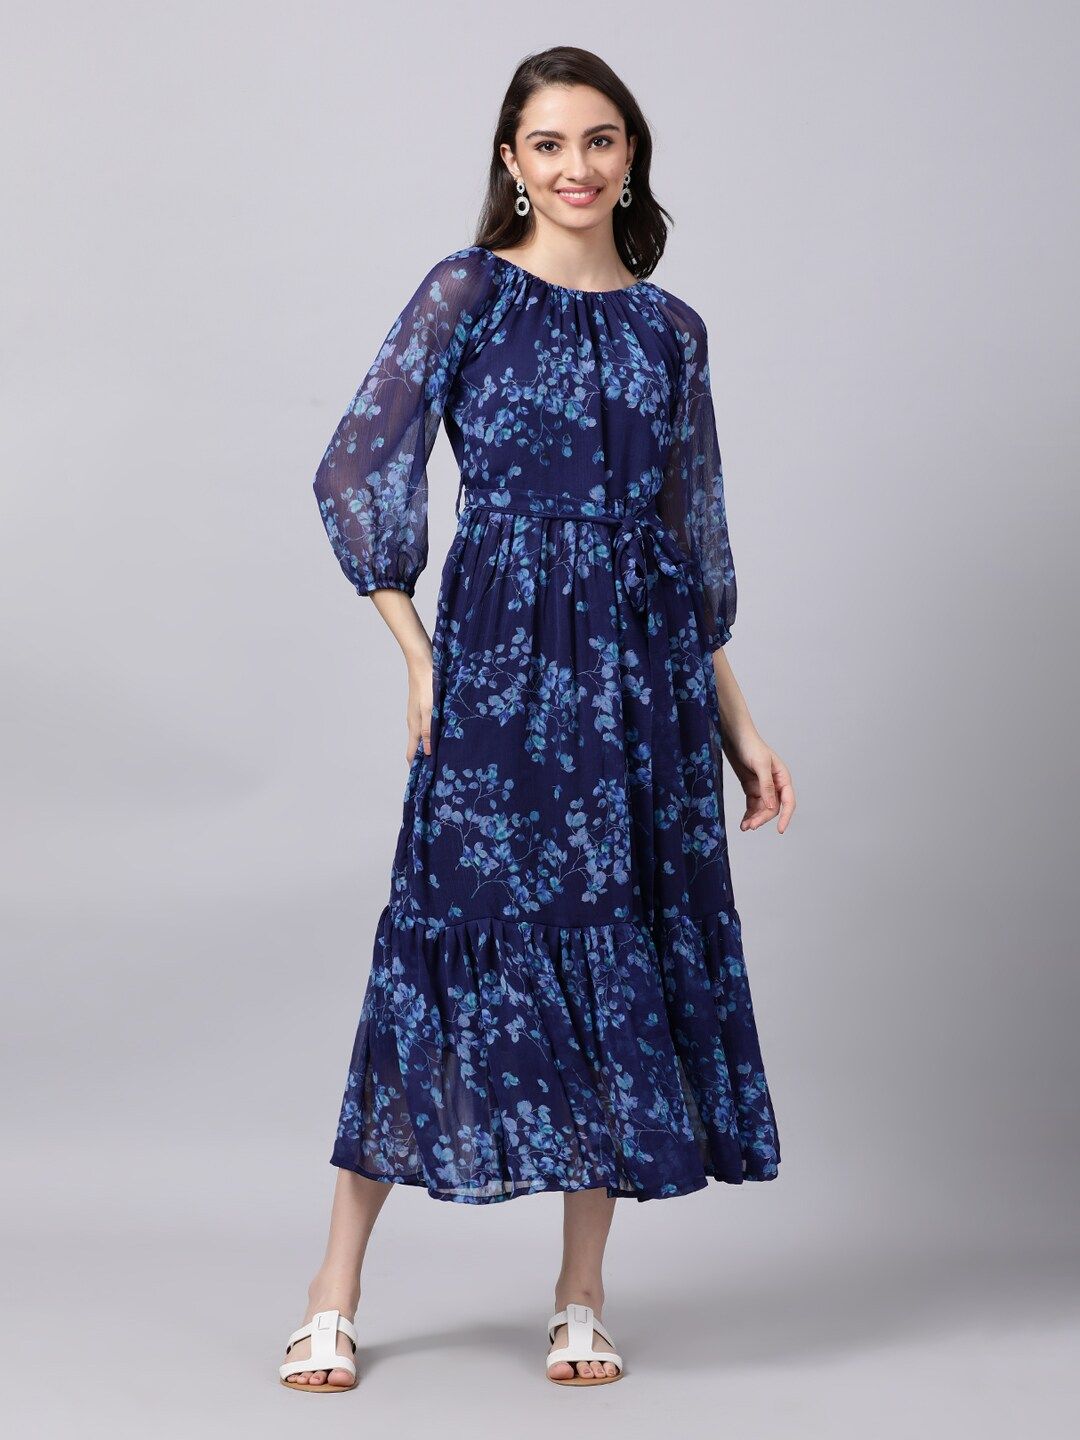 Souchii Navy Blue Floral Layered Chiffon A-Line Midi Dress Price in India